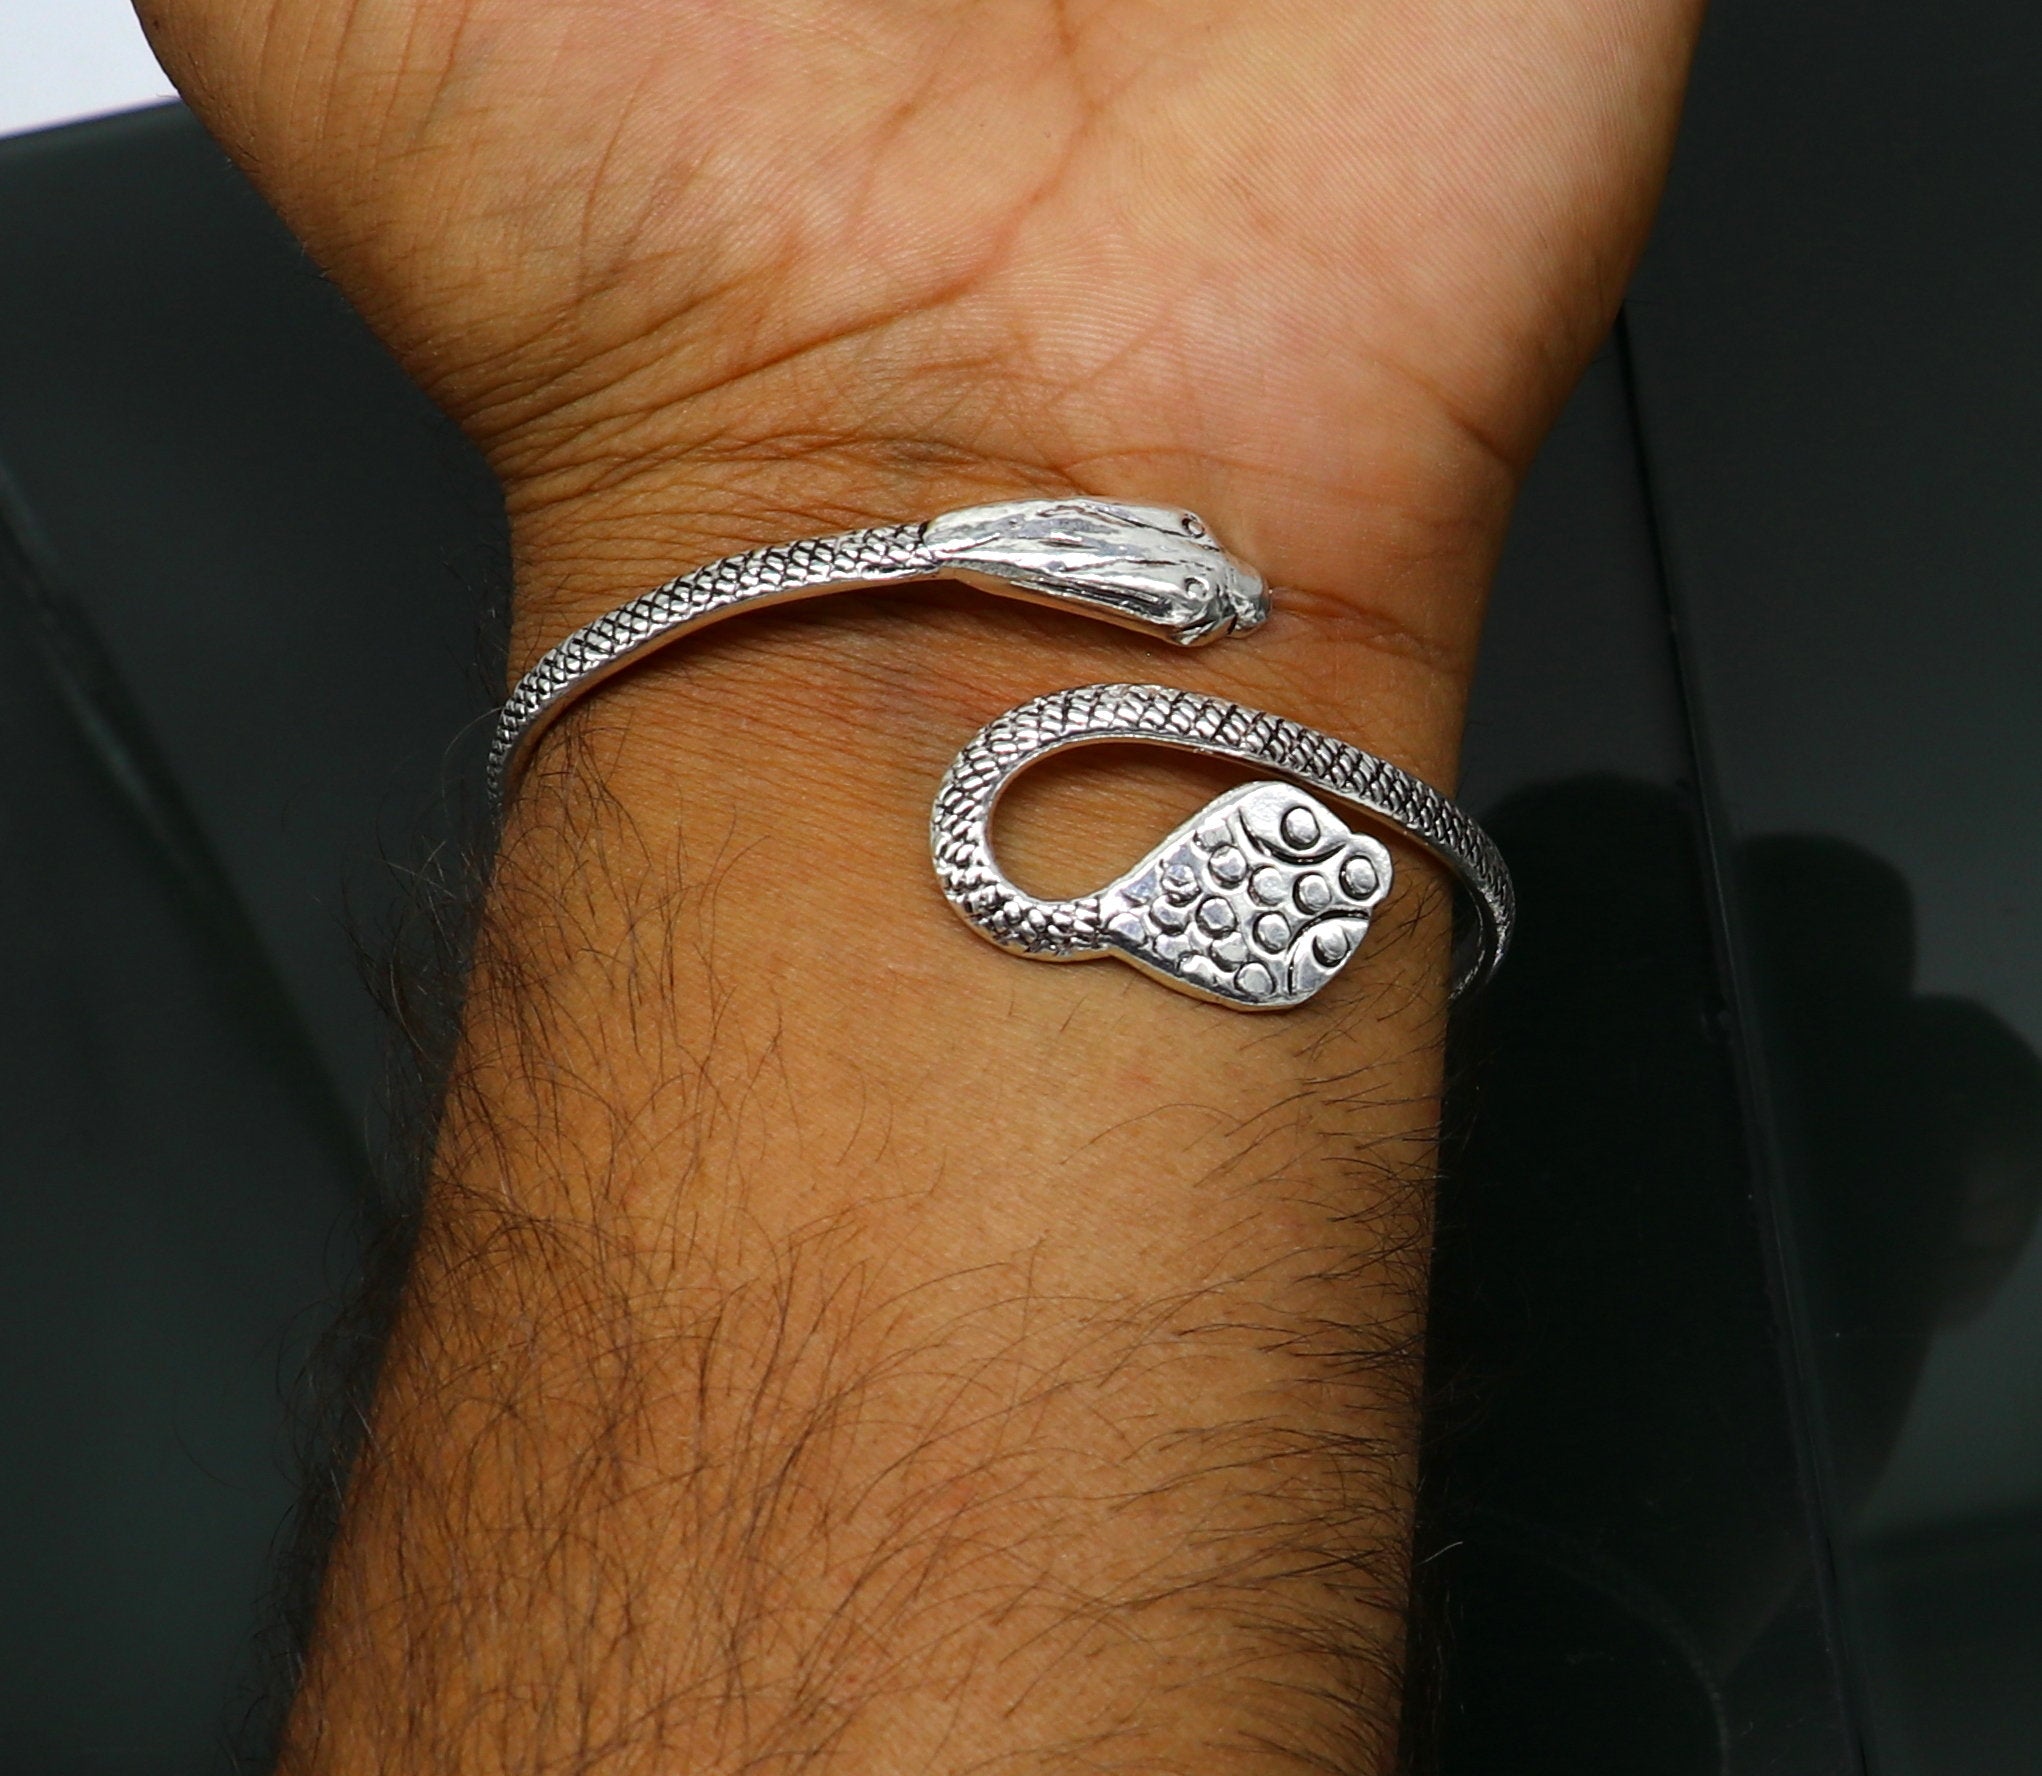 925 Sterling Silver Snake Chain 925 Silver Bangles Bracelet With Pave  Setting CZ For Women DIY Luxury Jewelry PAS904 231118 From Yao05, $14.15 |  DHgate.Com